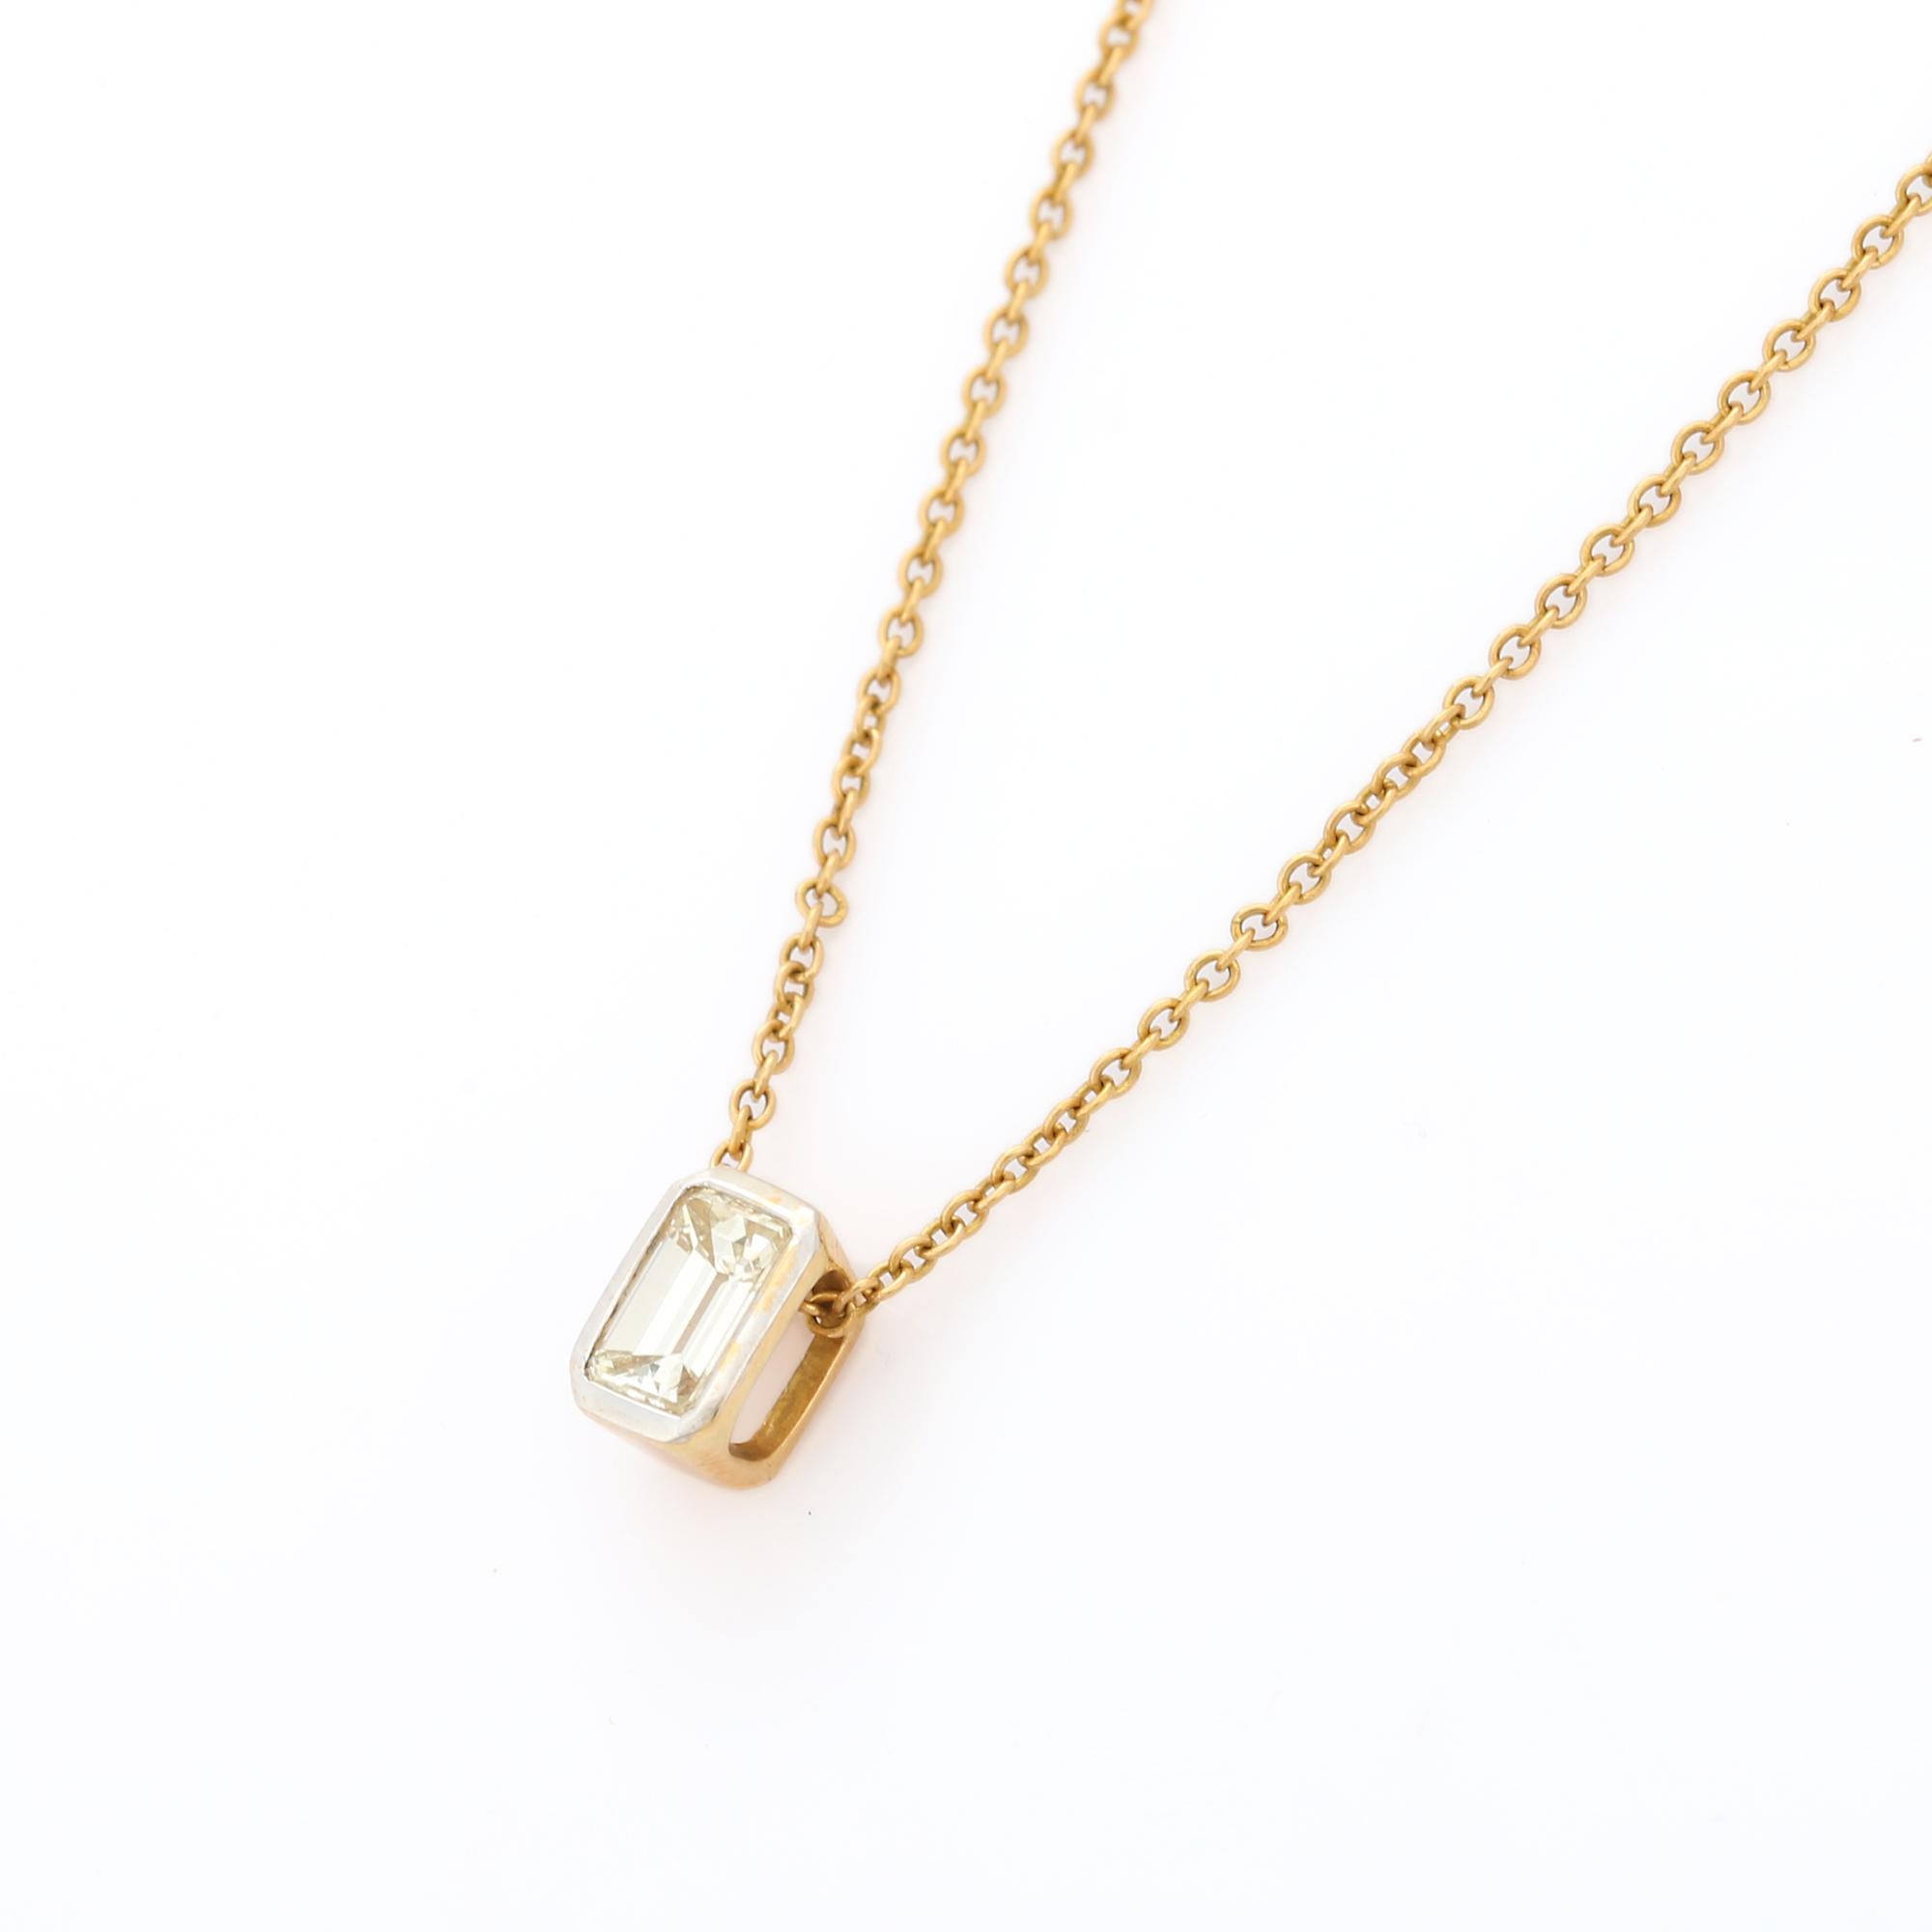 Diamond Necklace in 18K Gold studded with Octagon cut diamonds.
Accessorize your look with this elegant diamond chain necklace. This stunning piece of jewelry instantly elevates a casual look or dressy outfit. Comfortable and easy to wear, it is